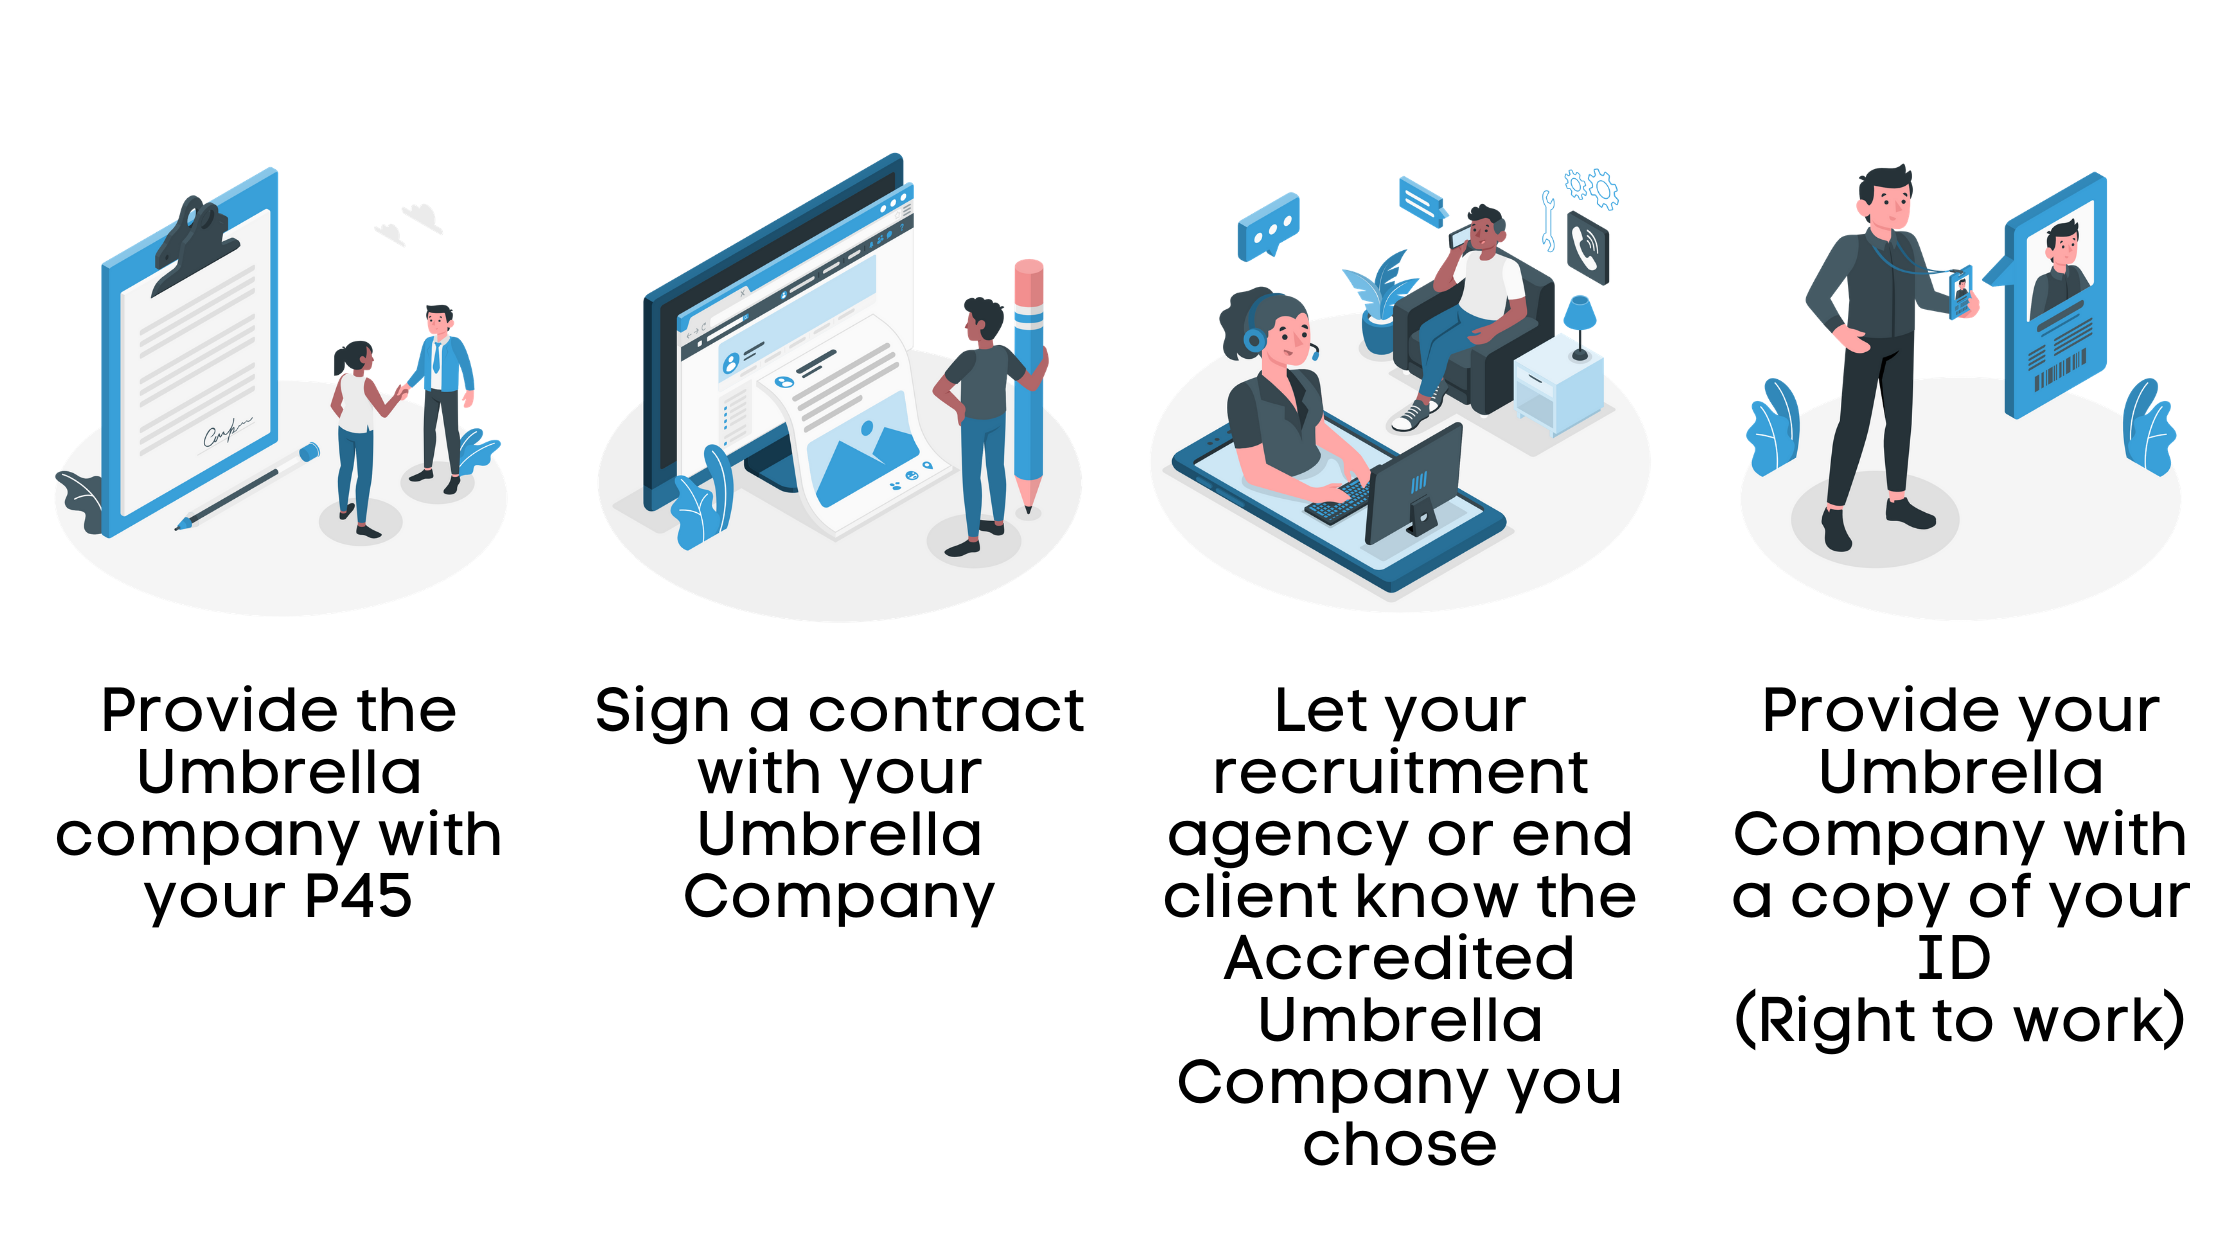 Main steps to register with an Umbrella Company in 2021